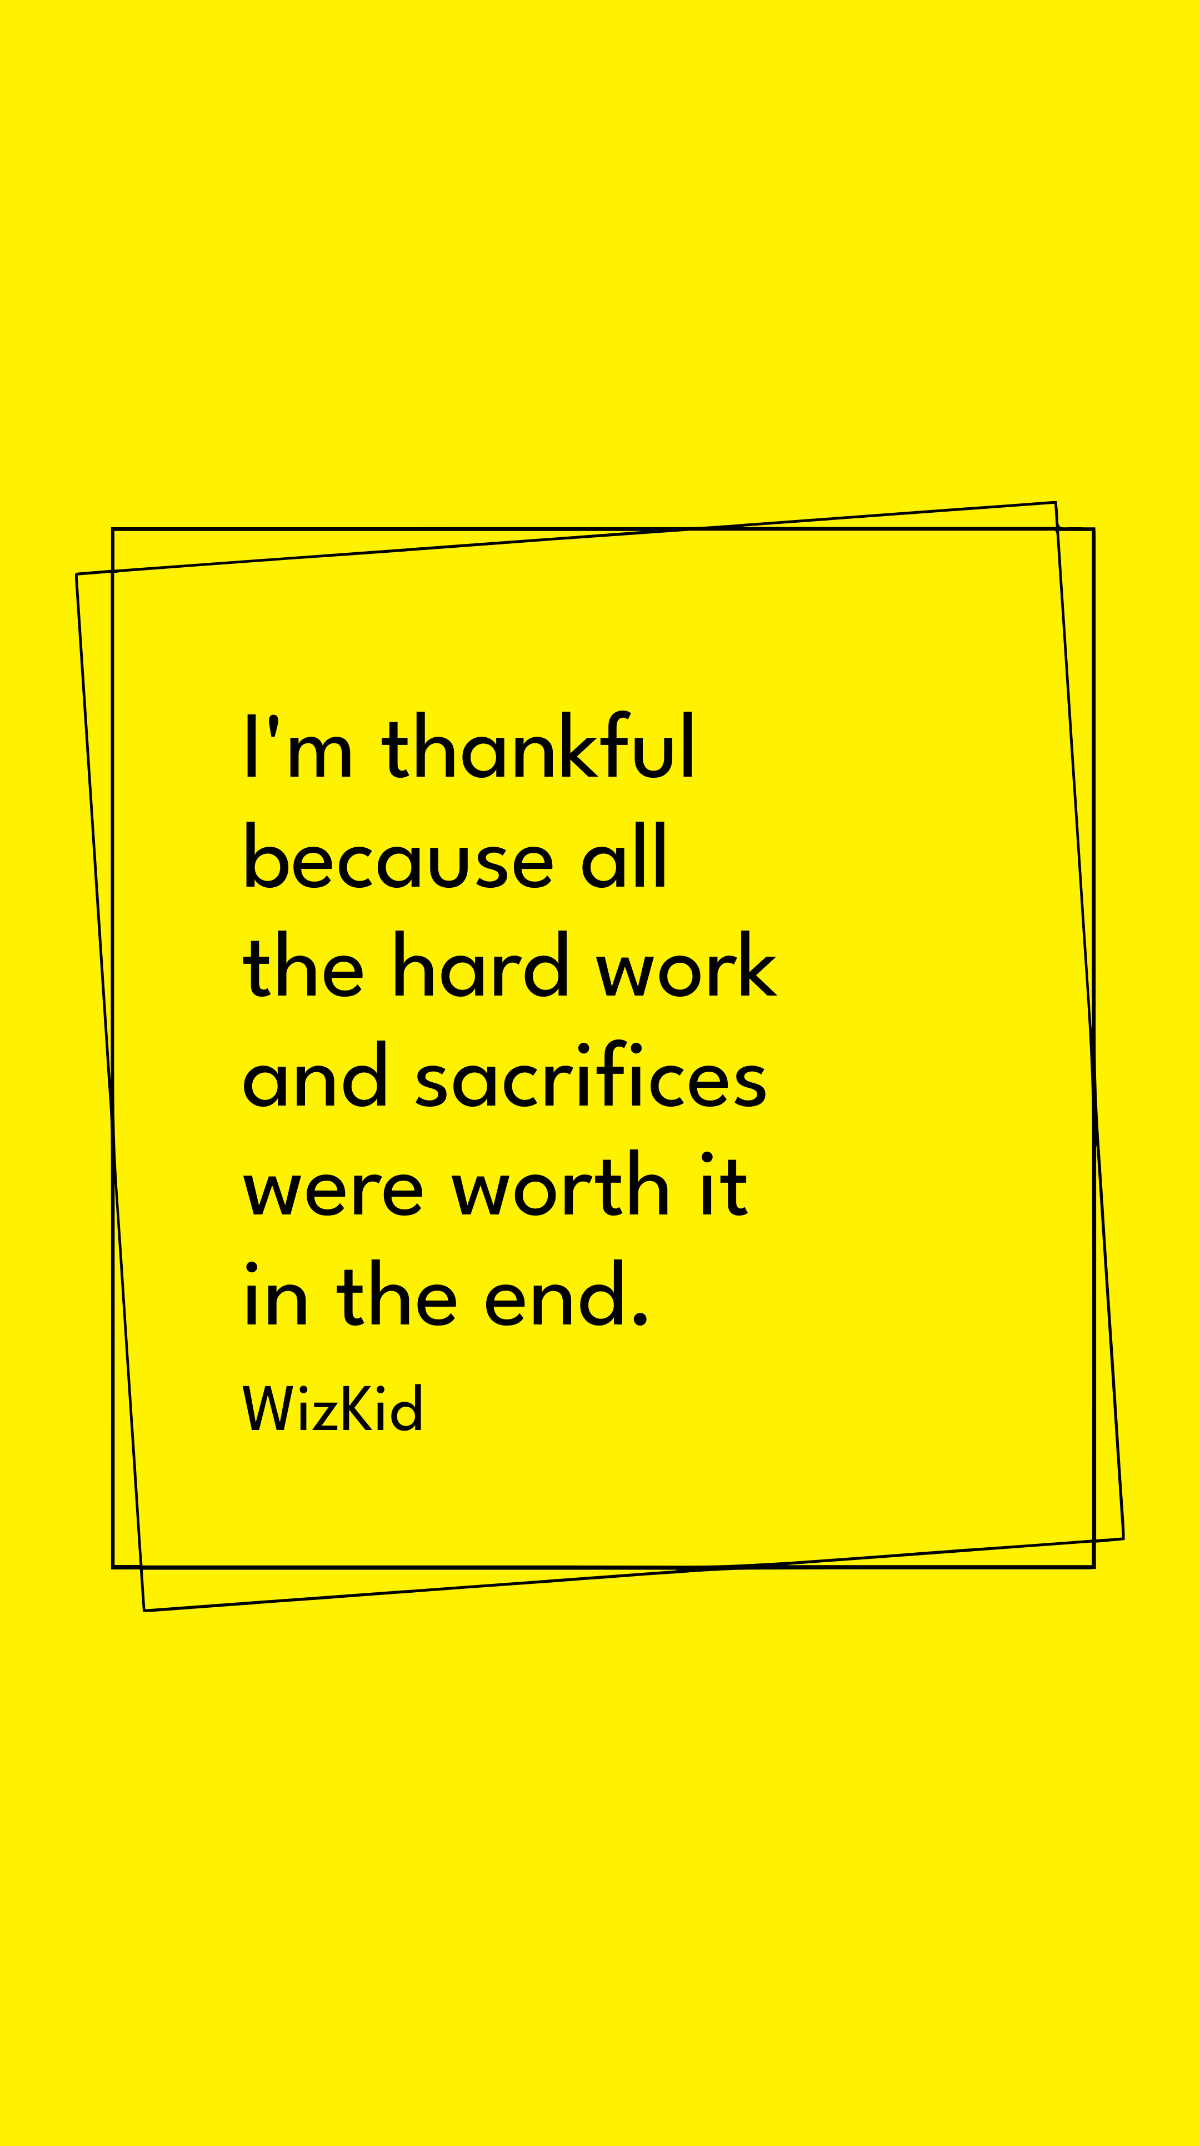 WizKid - I'm thankful because all the hard work and sacrifices were worth it in the end. Template